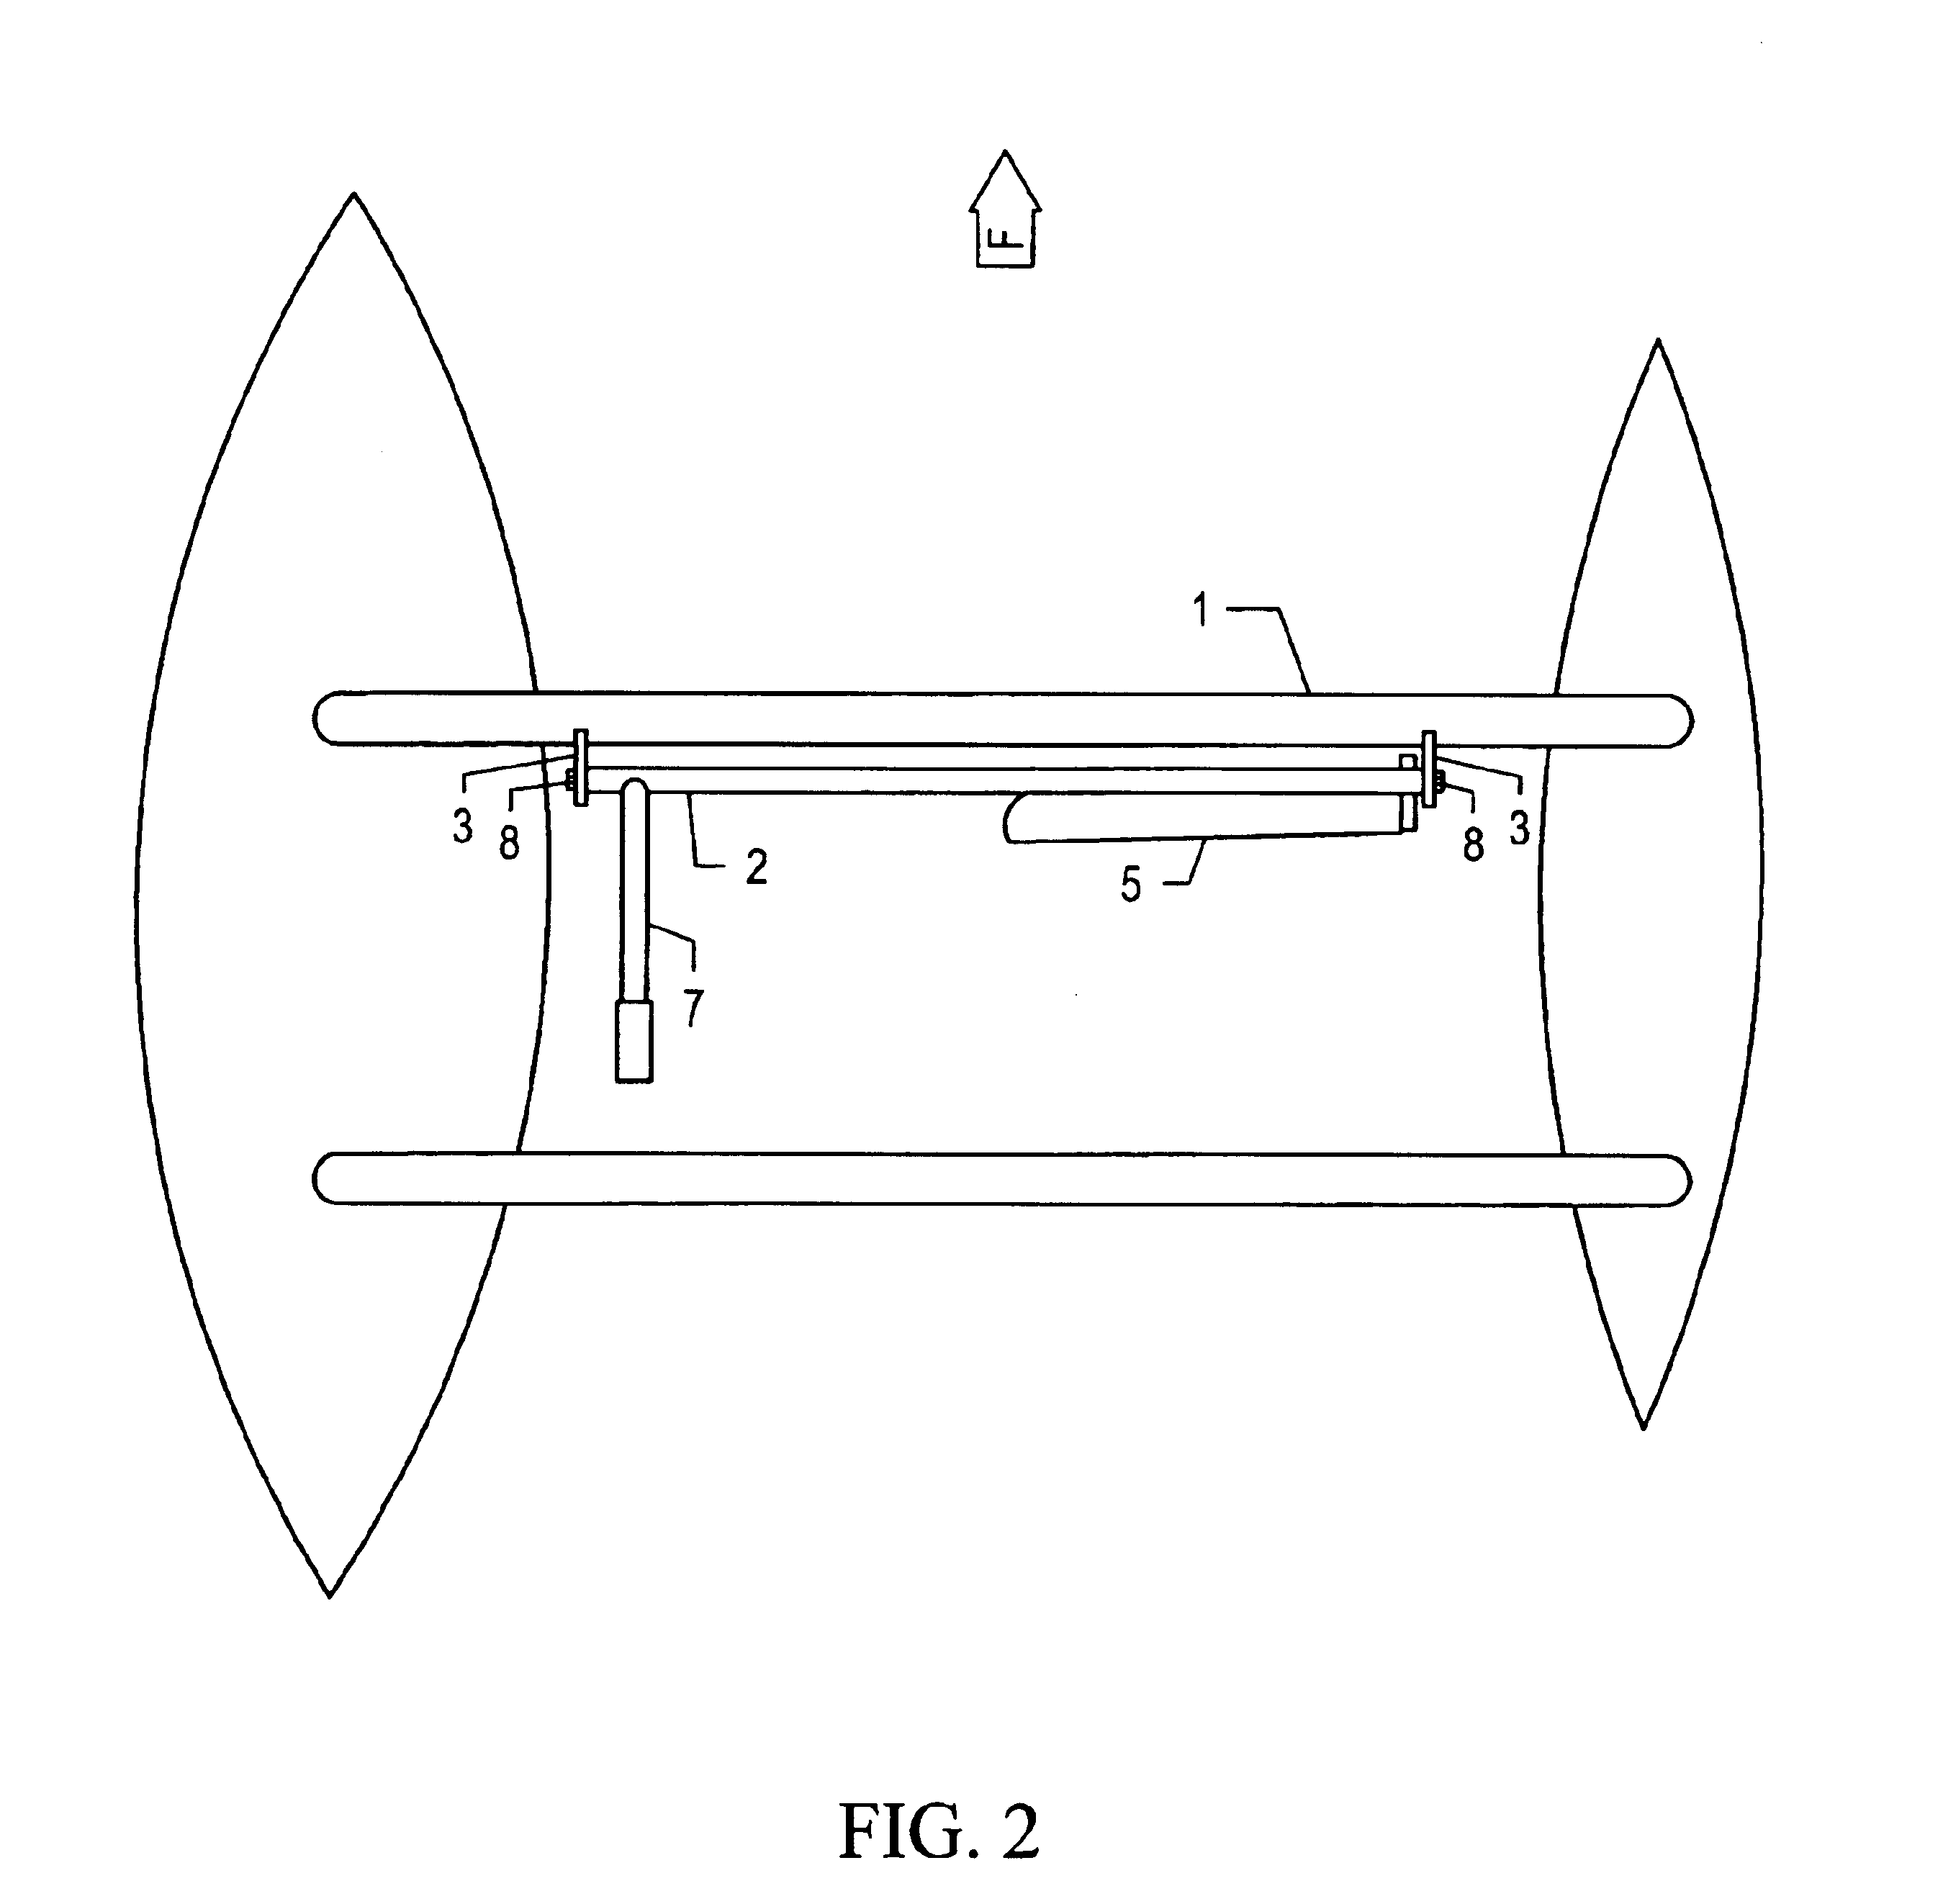 Manual hydrofoil and spar truss assembly for wind powered watercraft